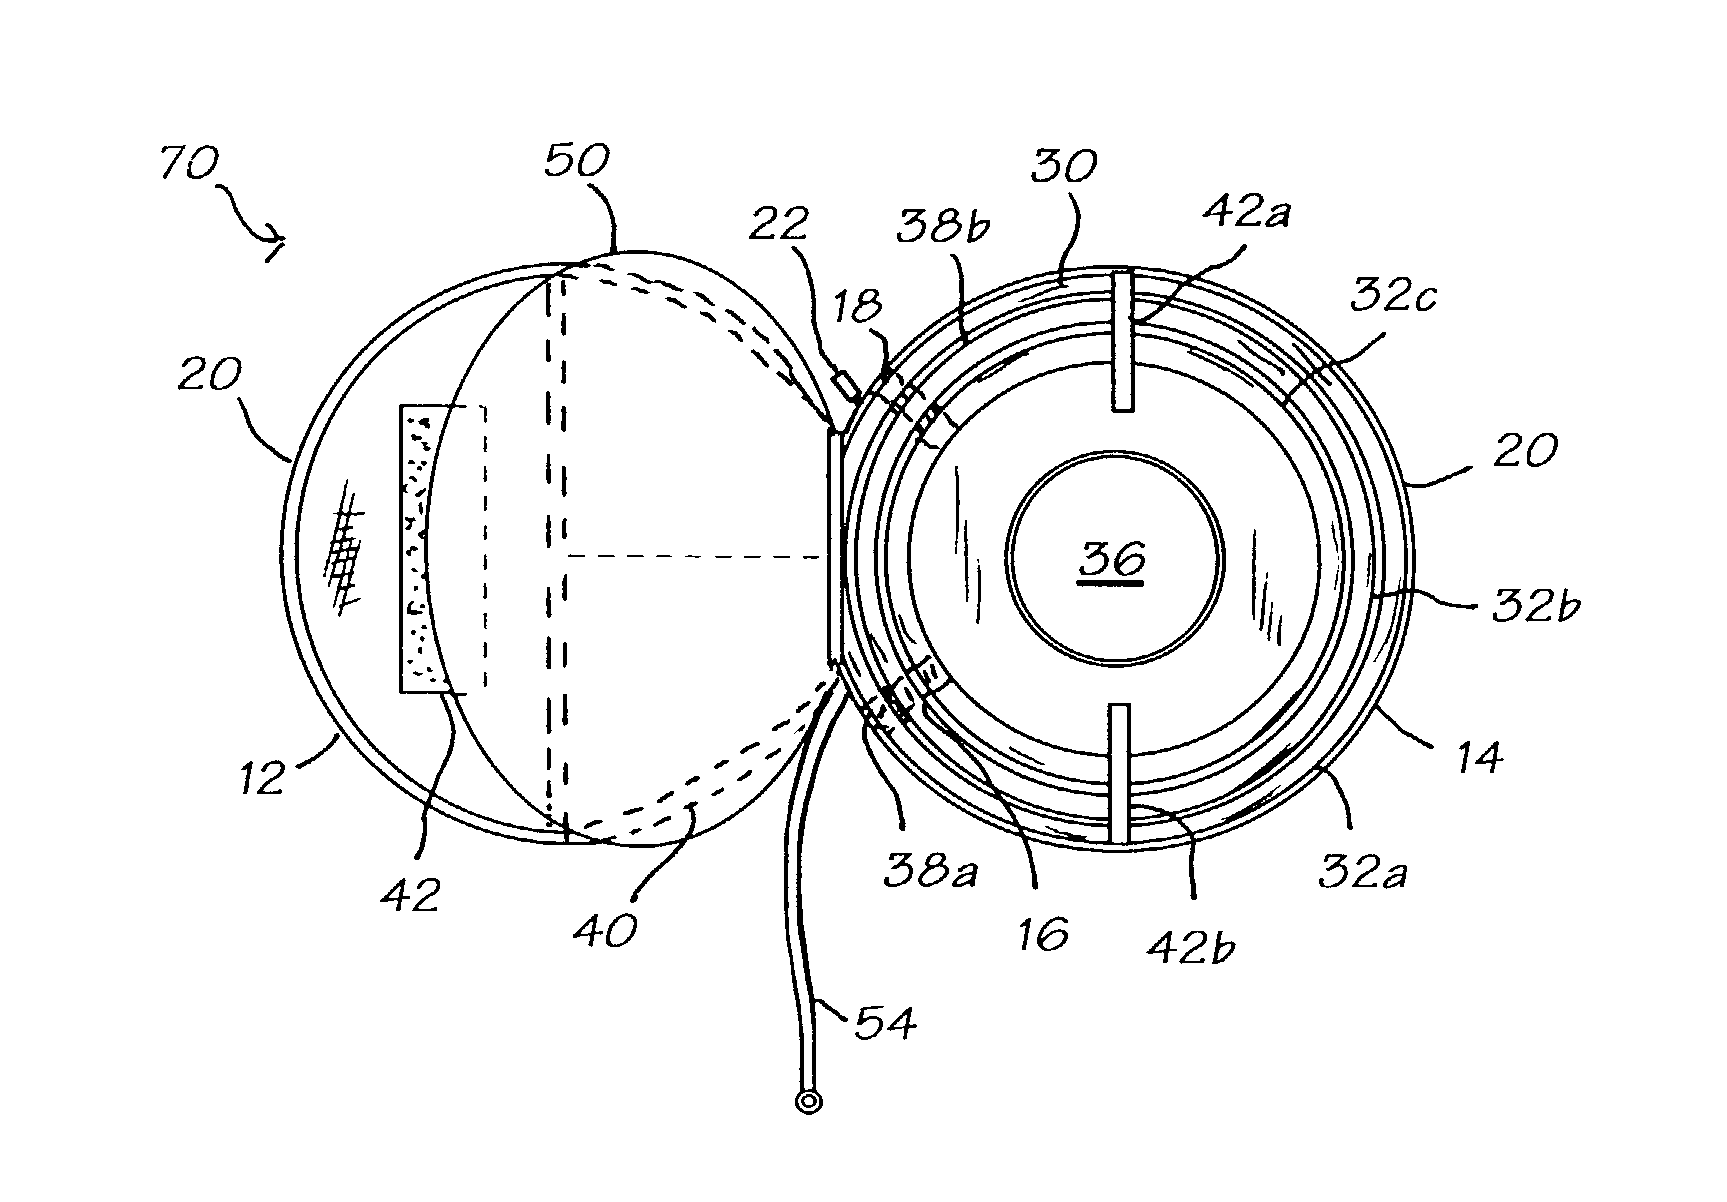 Cable storage device